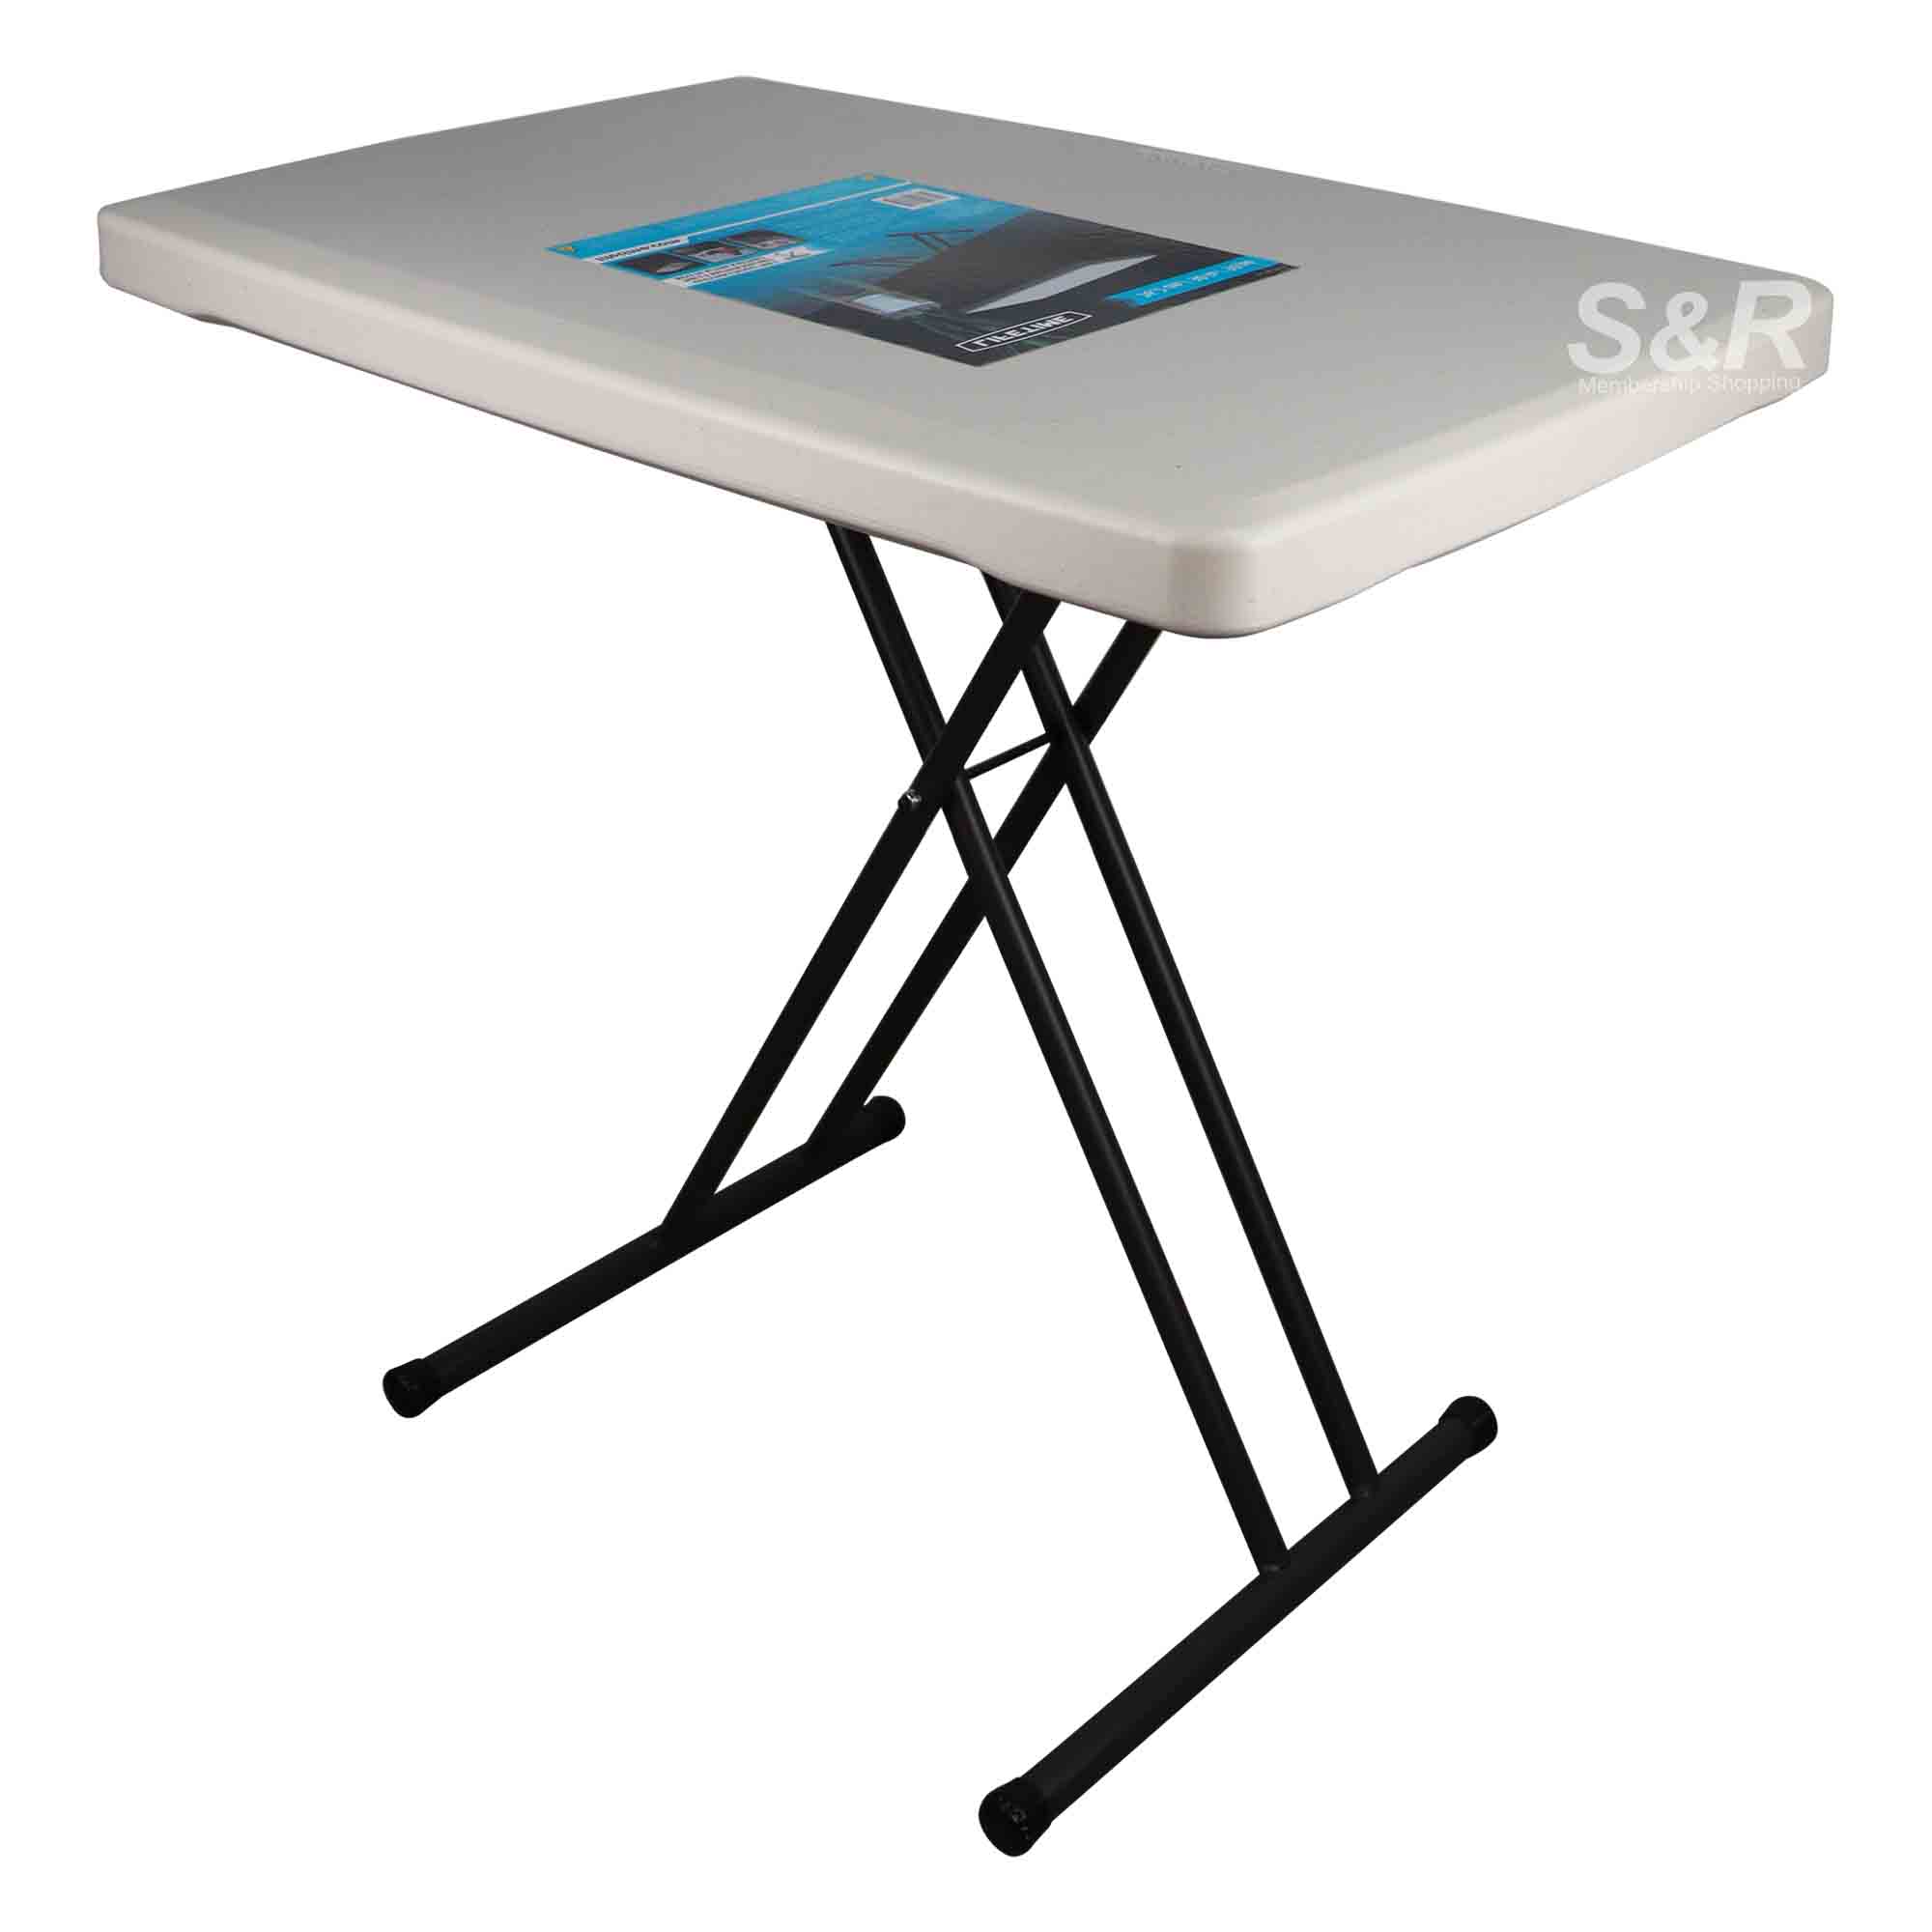 Lifetime 30-inch Personal Table Model 80239